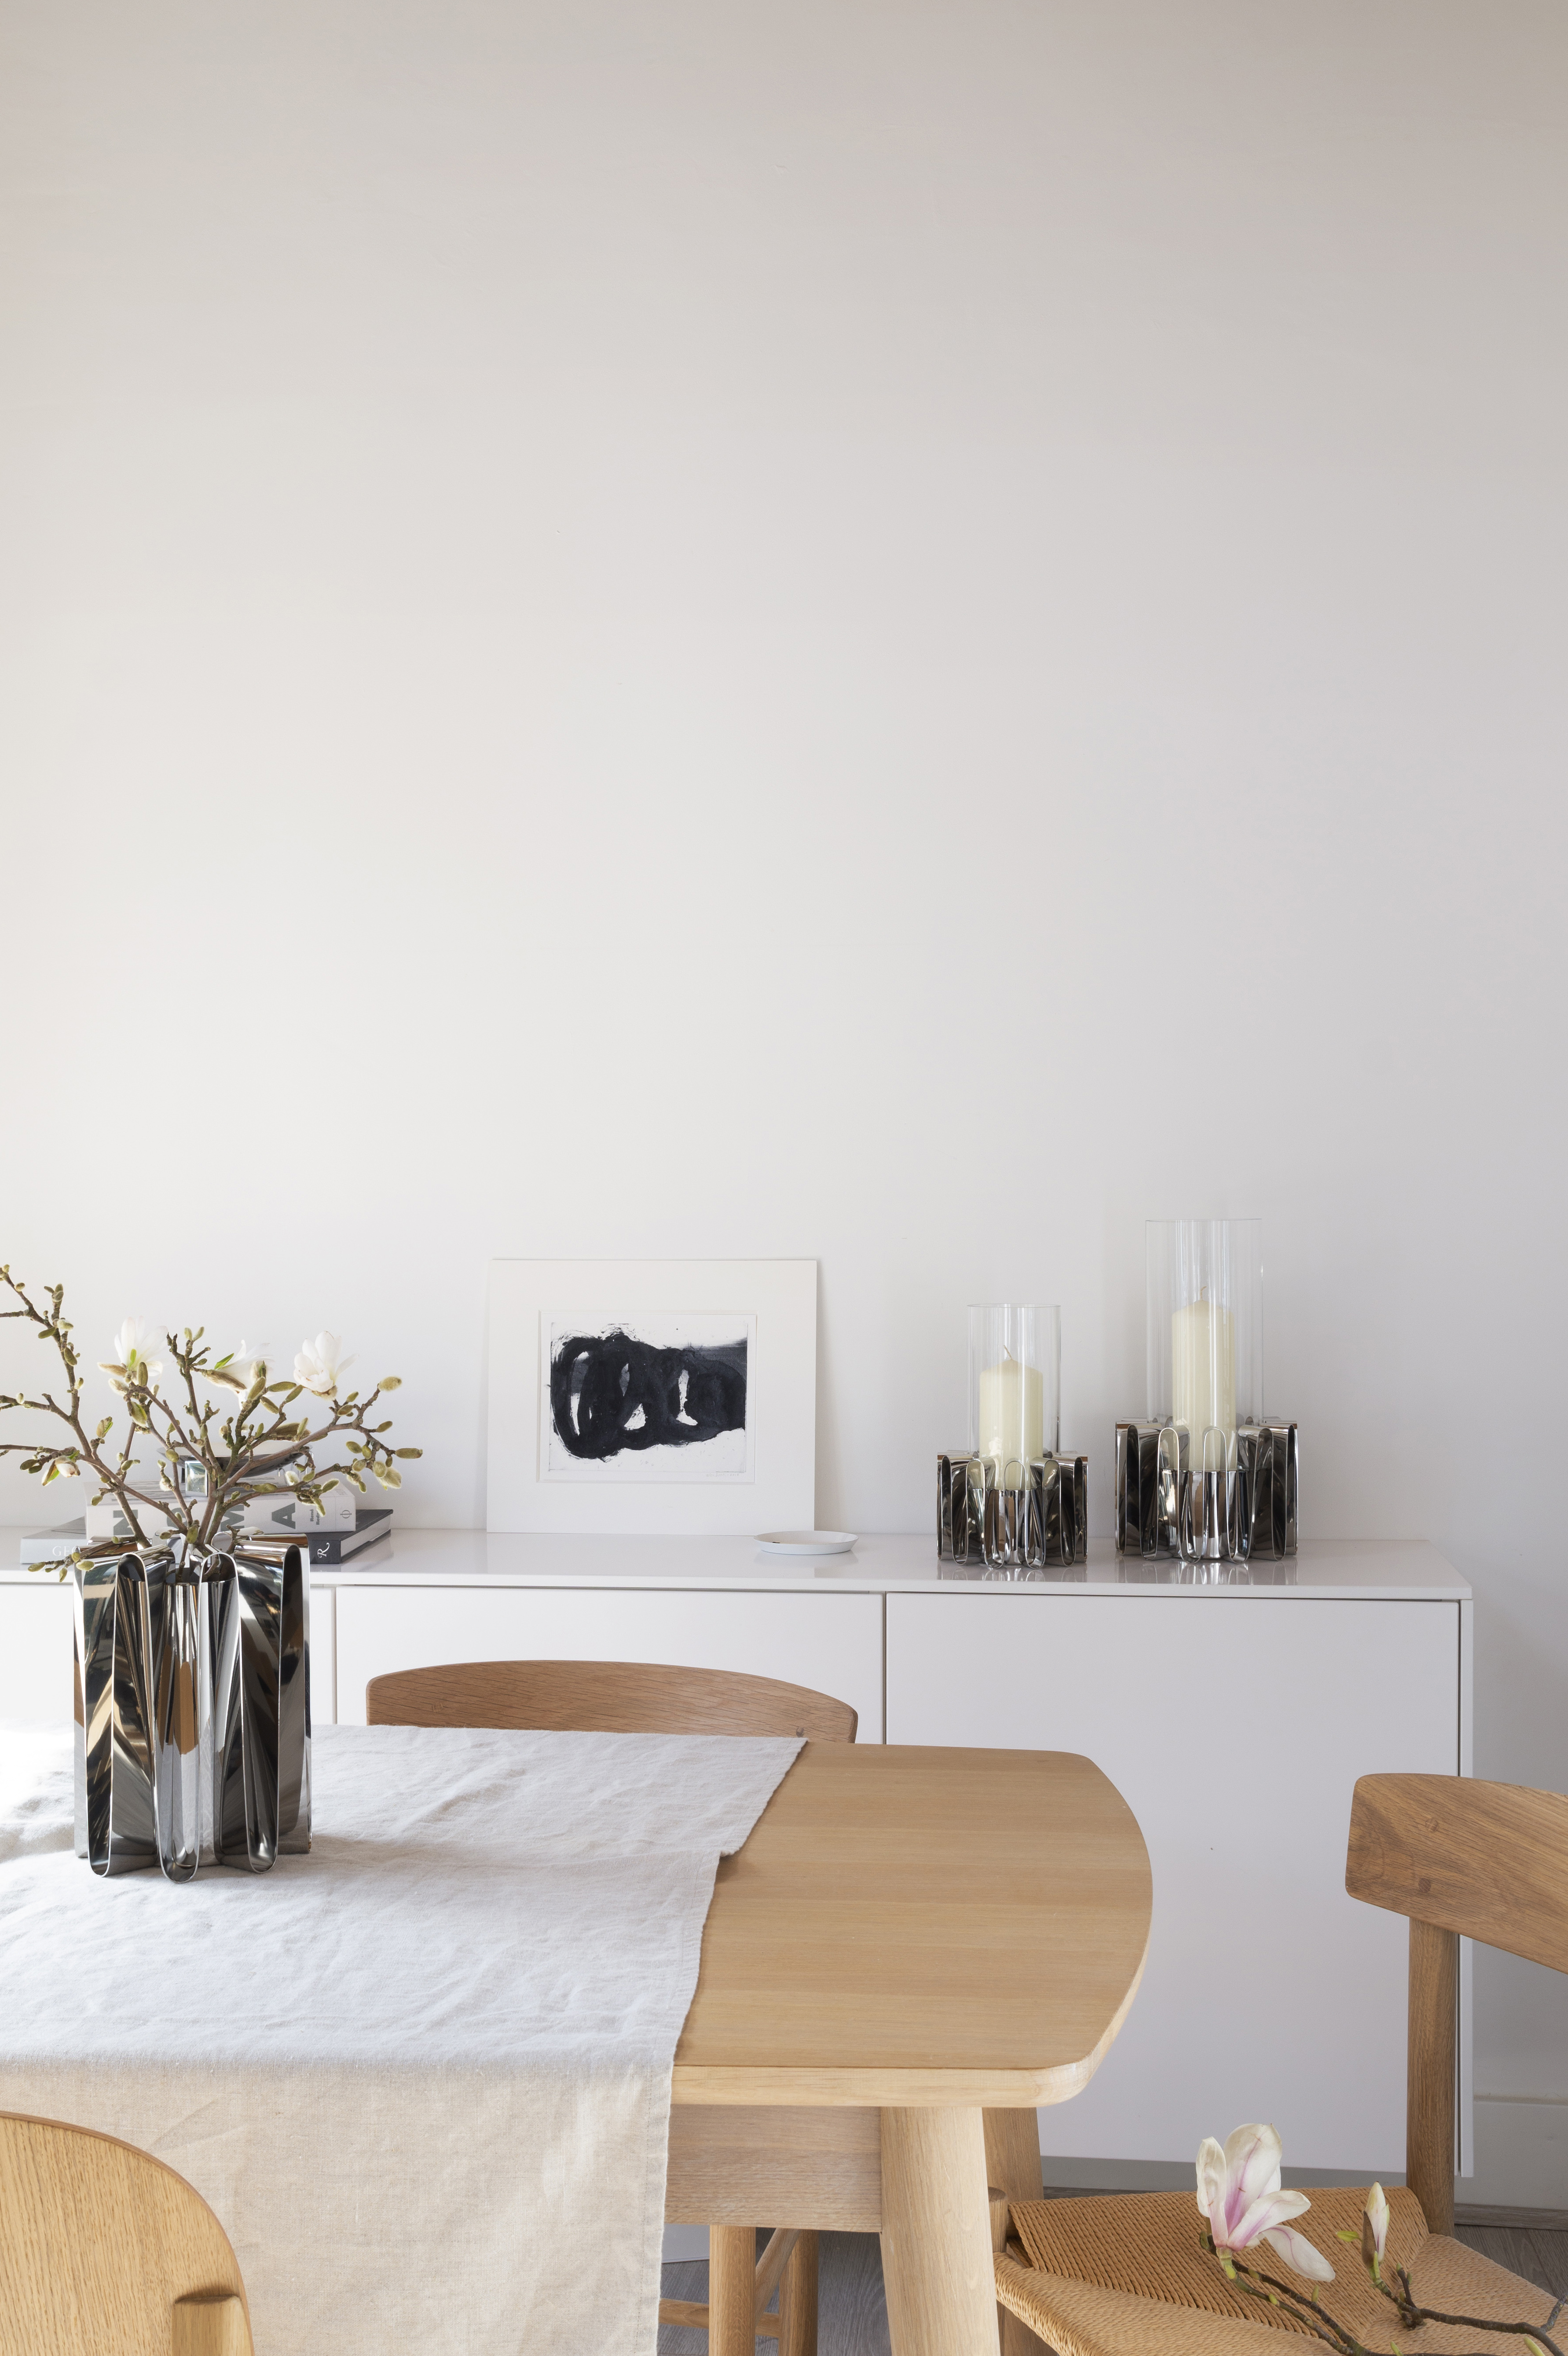 Frequency collection by Kelly Wearstler for Georg Jensen